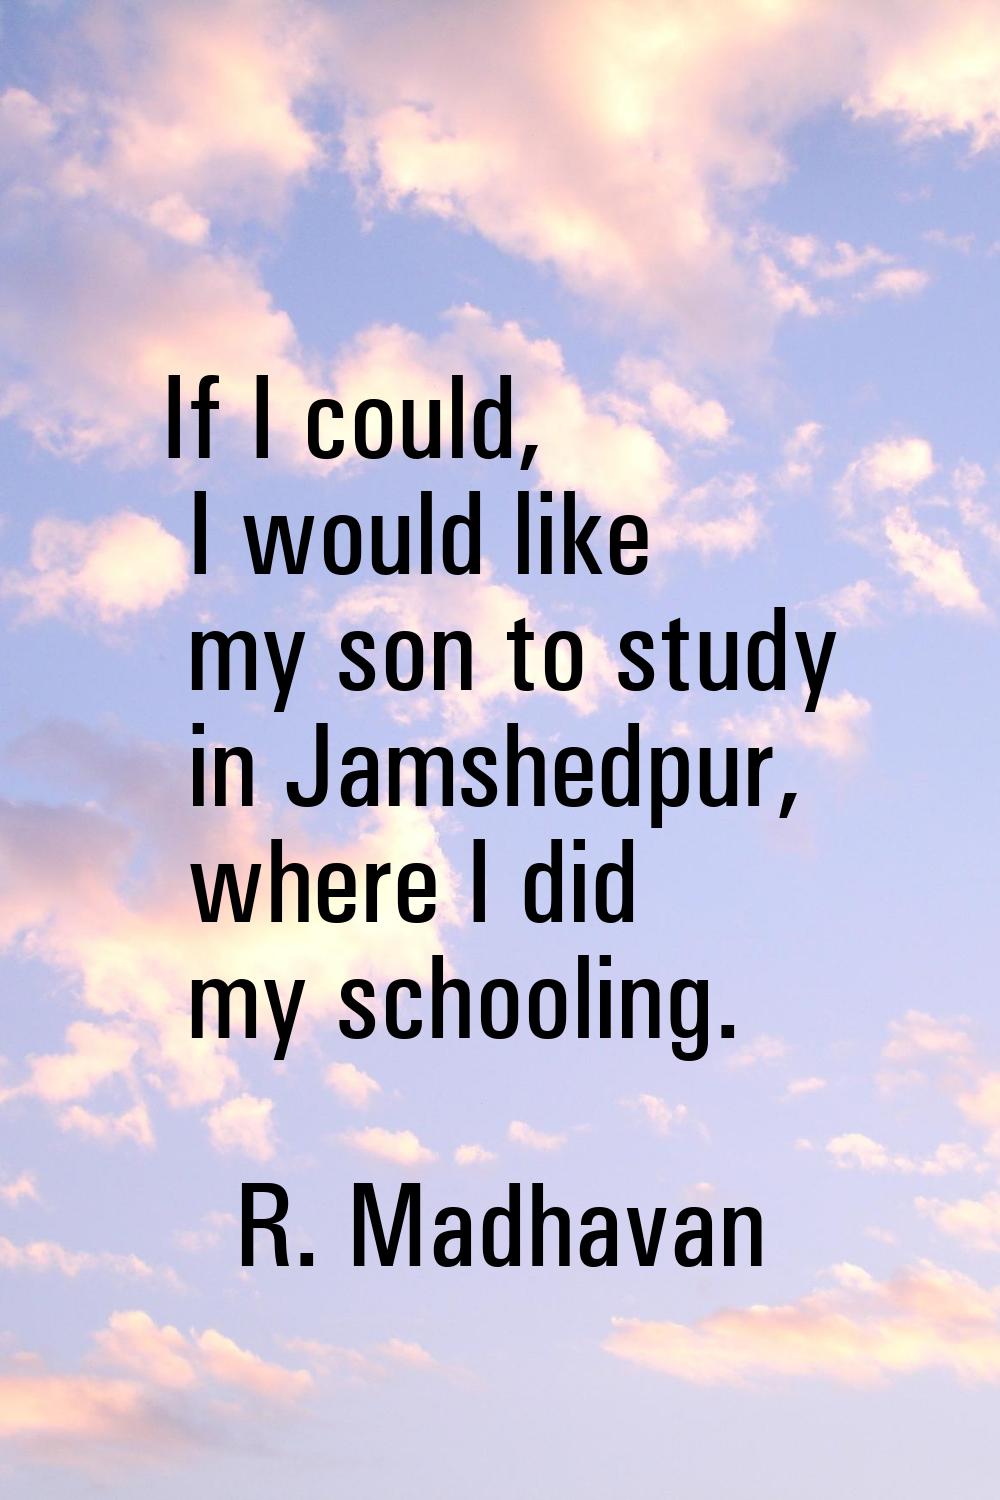 If I could, I would like my son to study in Jamshedpur, where I did my schooling.